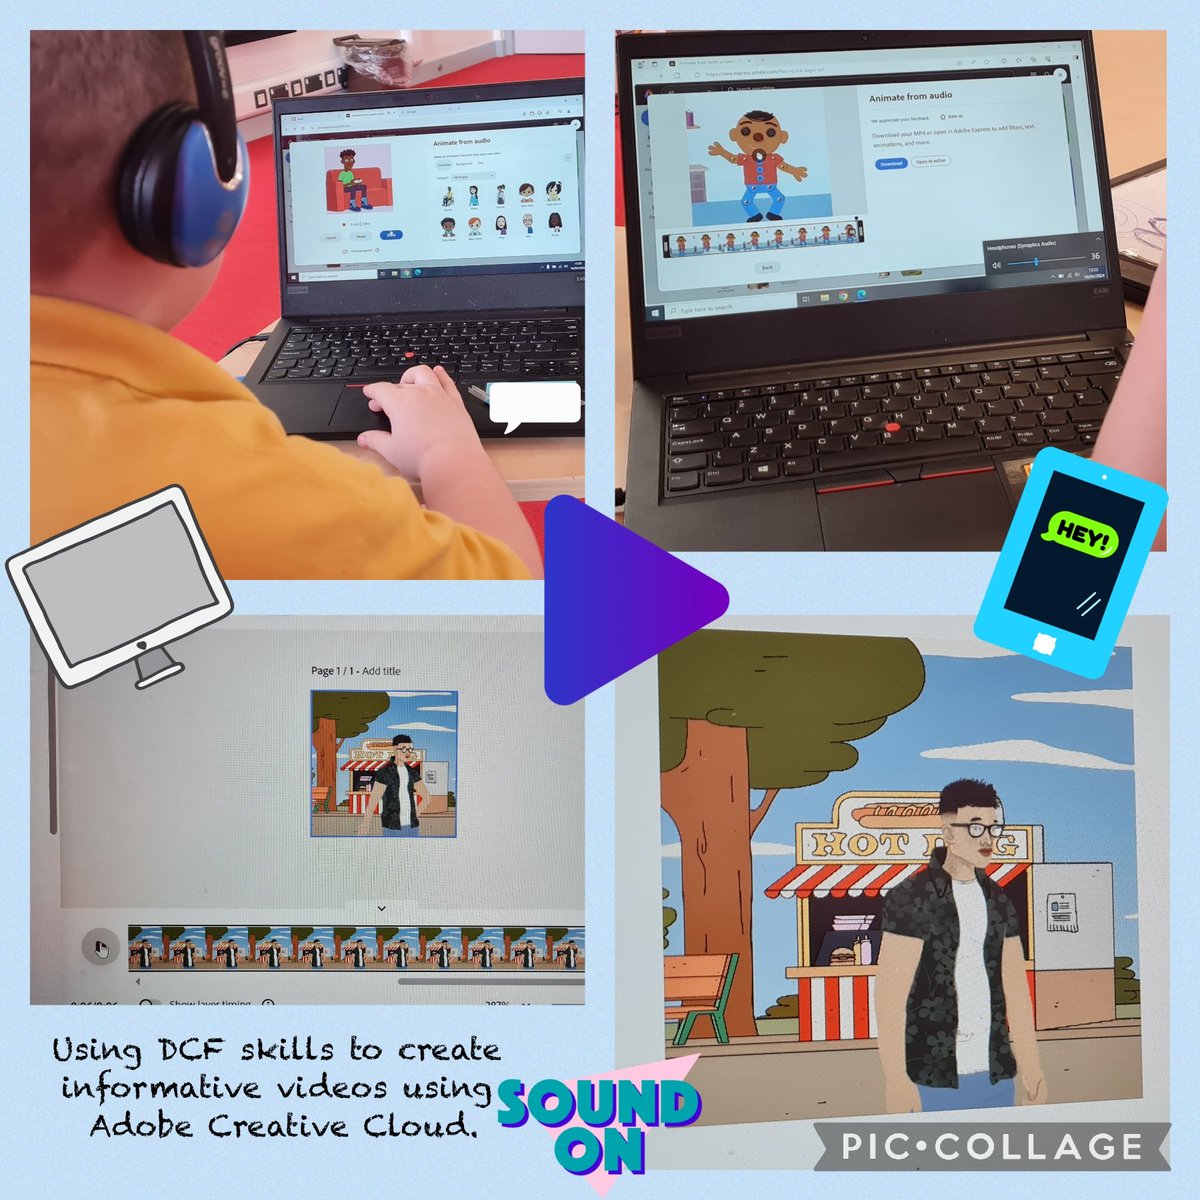 Afon Llwyd were so inspired by Mr Townsend's presentation that they asked if they could create their own videos today! #DCFSkills #AmbitiousCapableLearners #PupilVoice